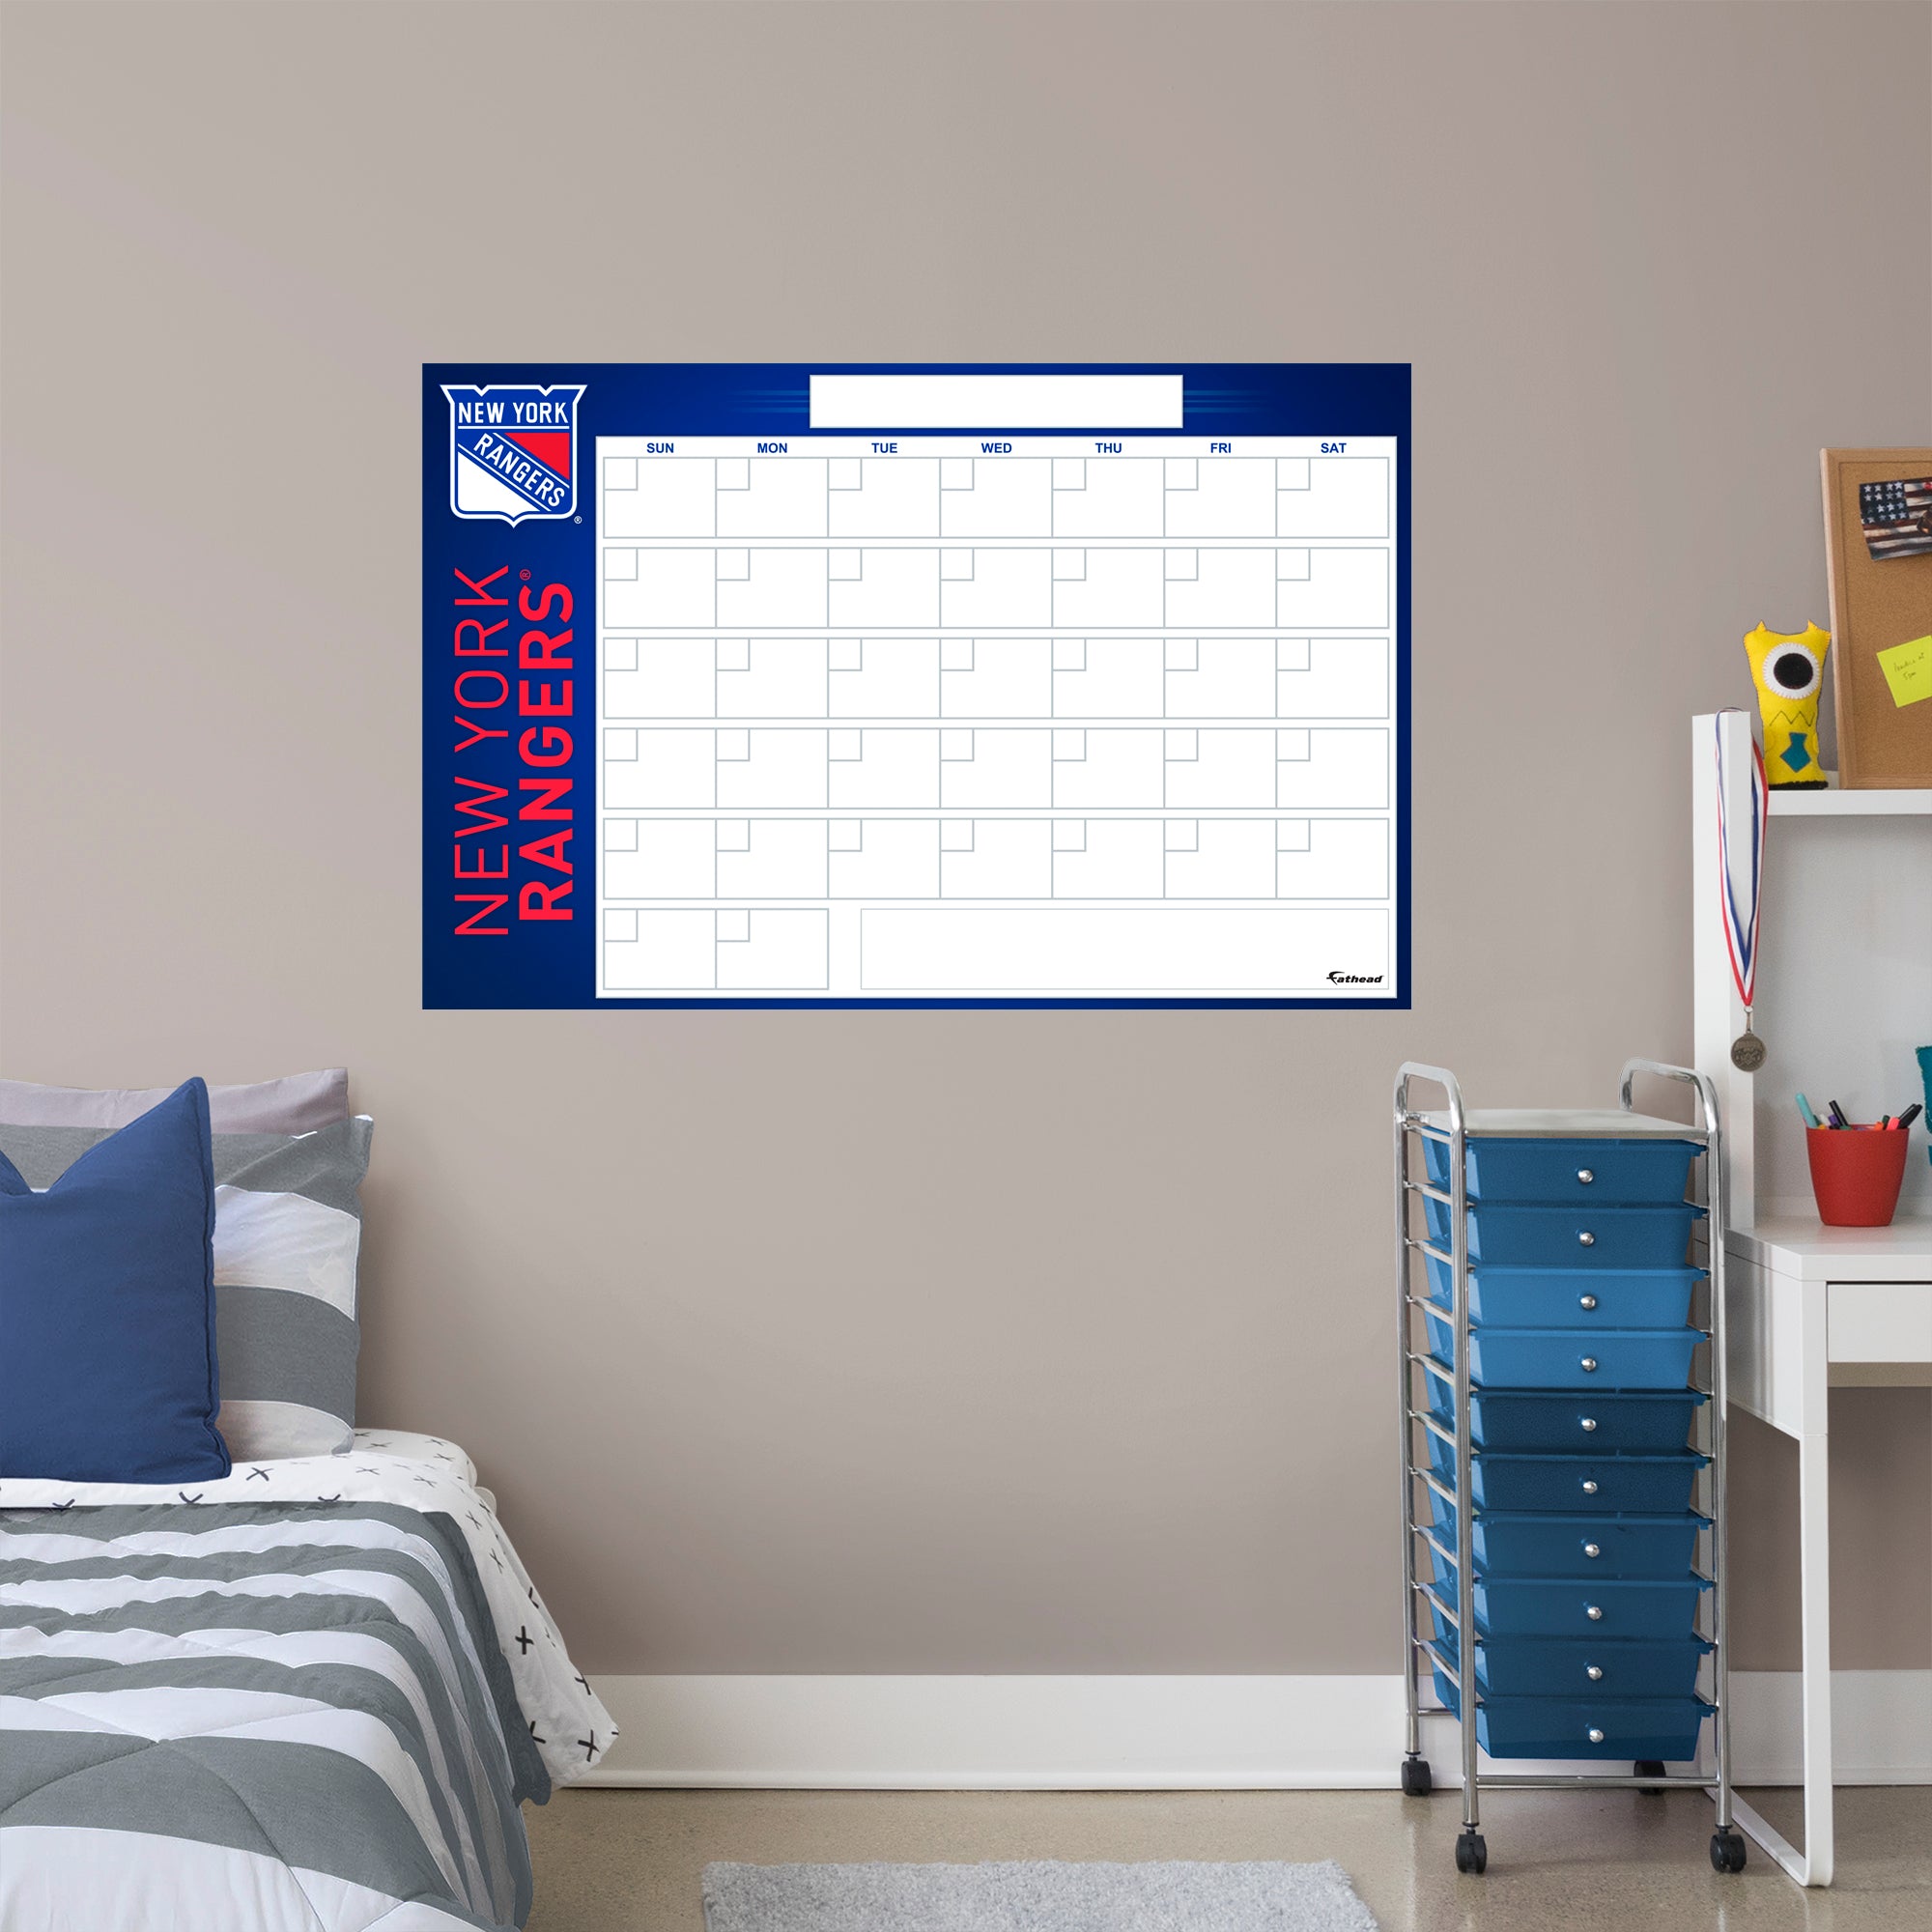 New York Rangers Dry Erase Calendar - Officially Licensed NHL Removable Wall Decal Giant Decal (57"W x 34"H) by Fathead | Vinyl